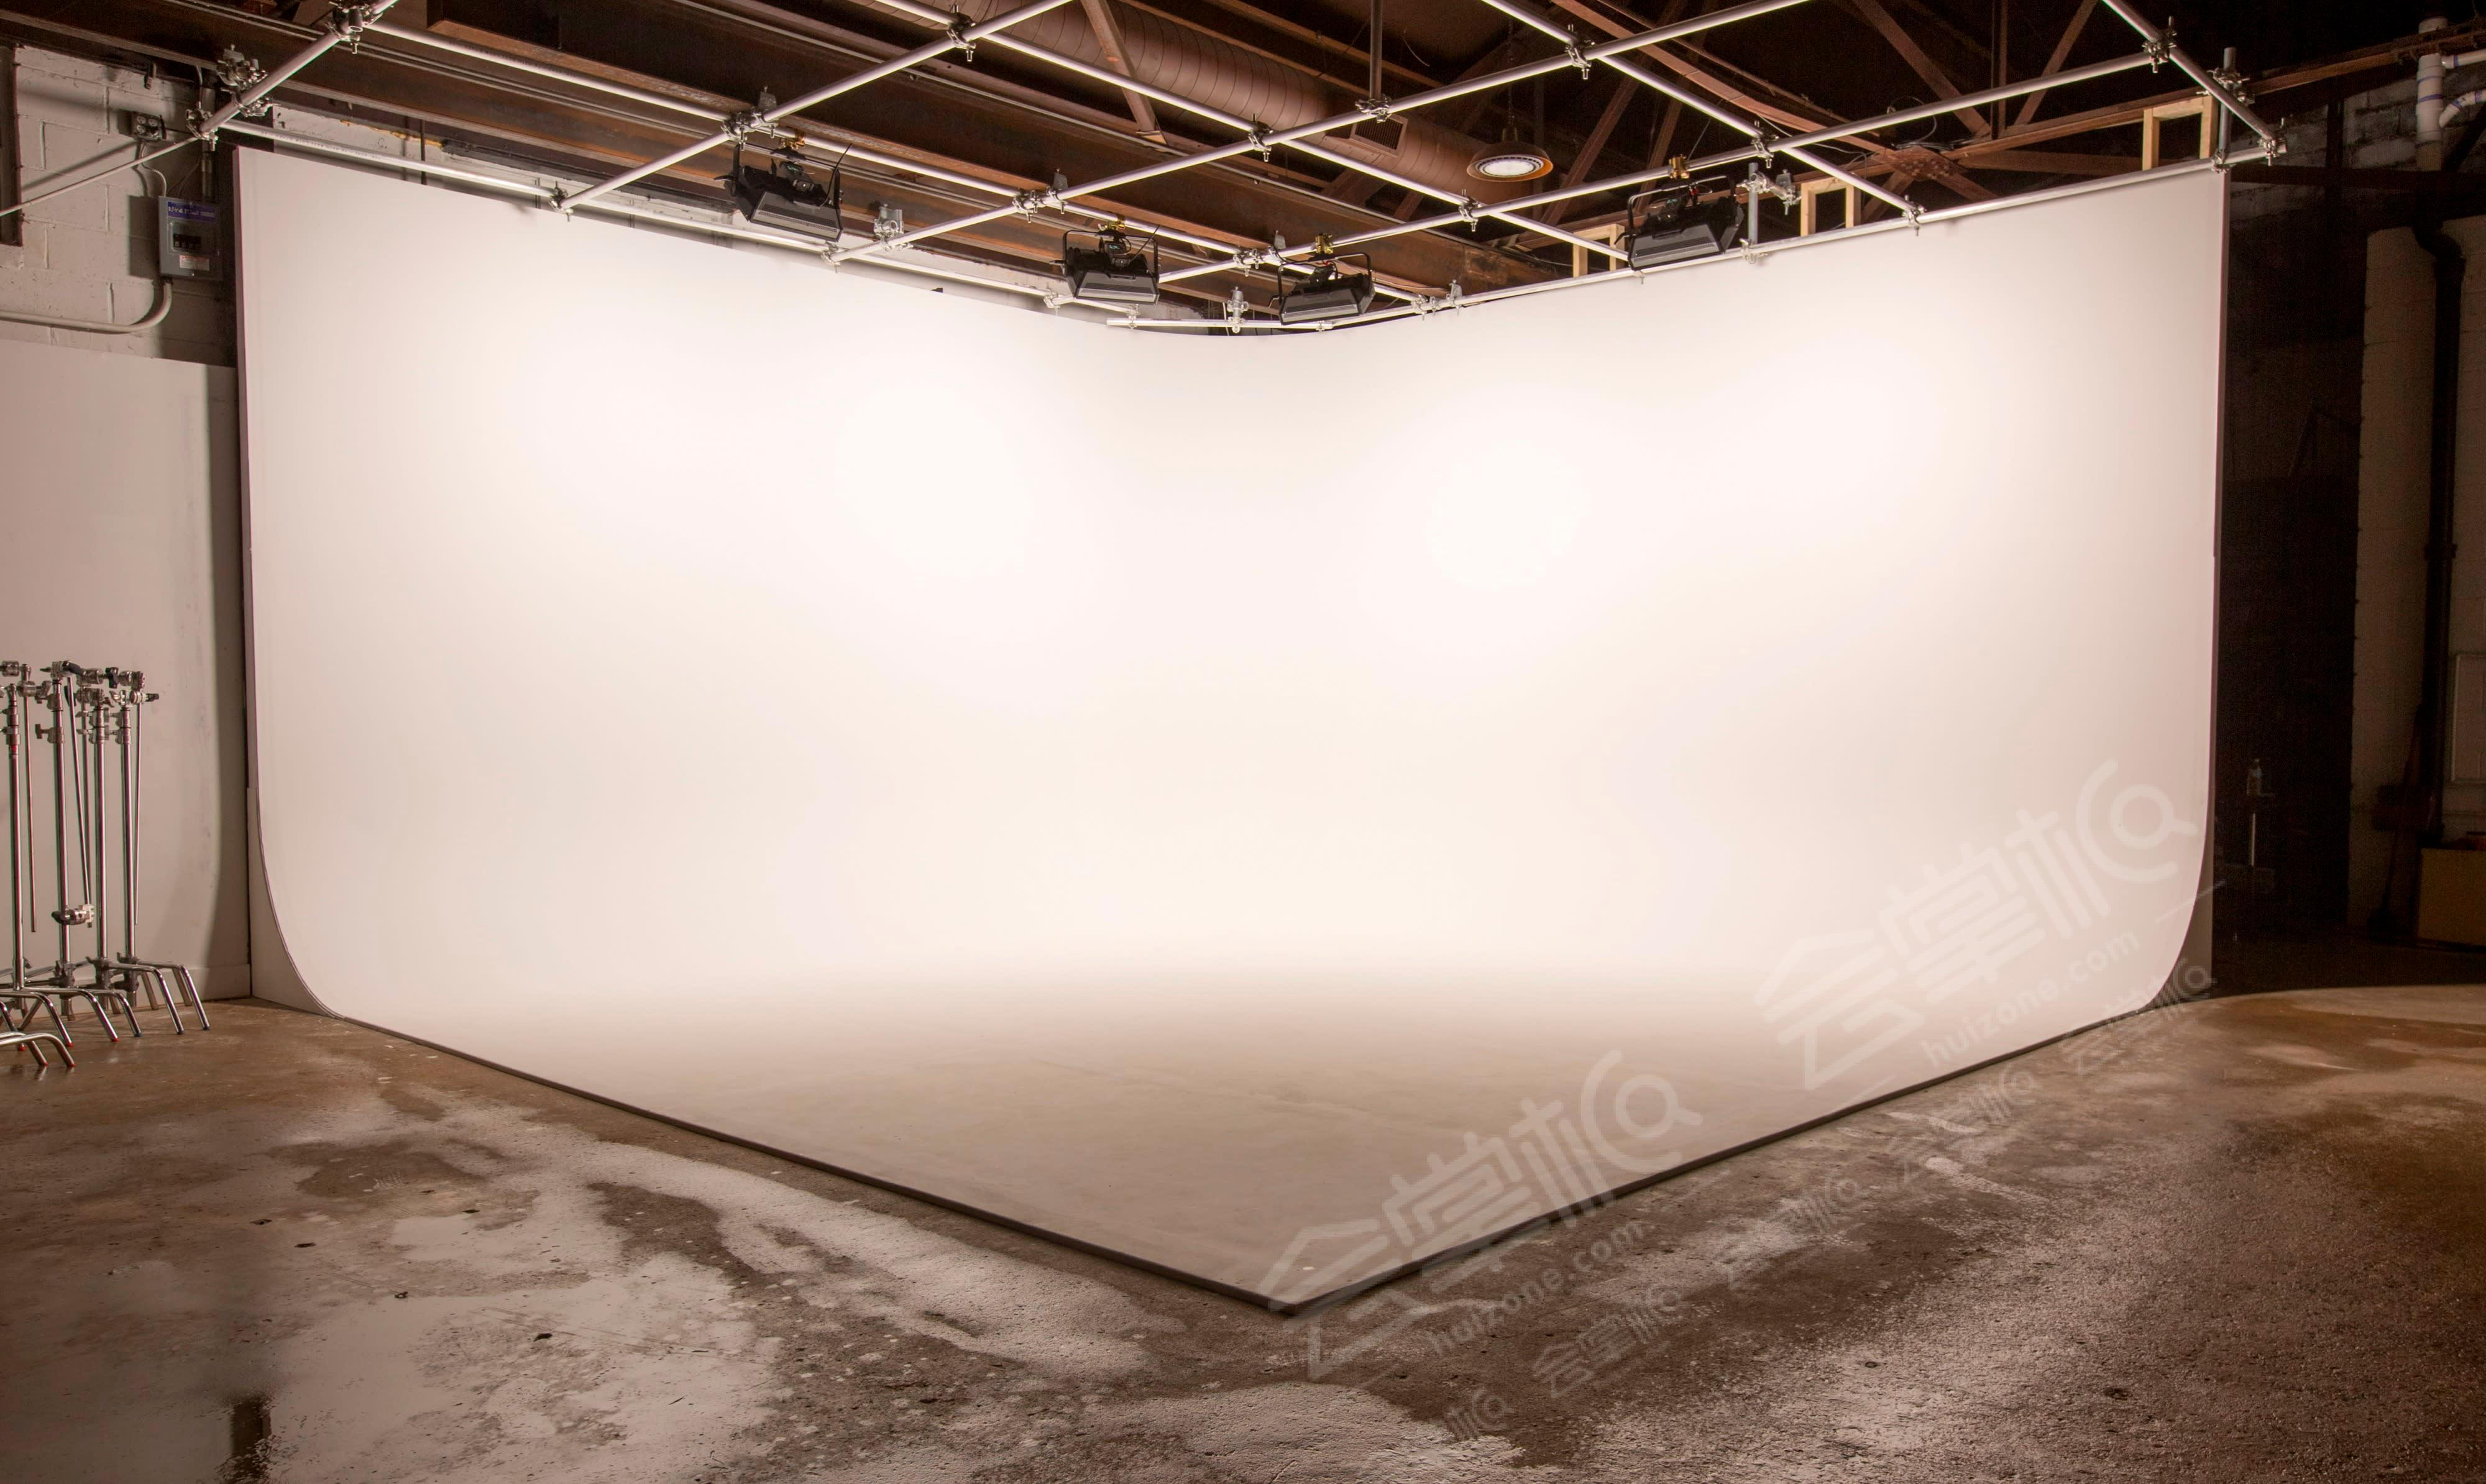 Flexible Production Studio w/ 2 Wall RGG Cyc + Exterior Space